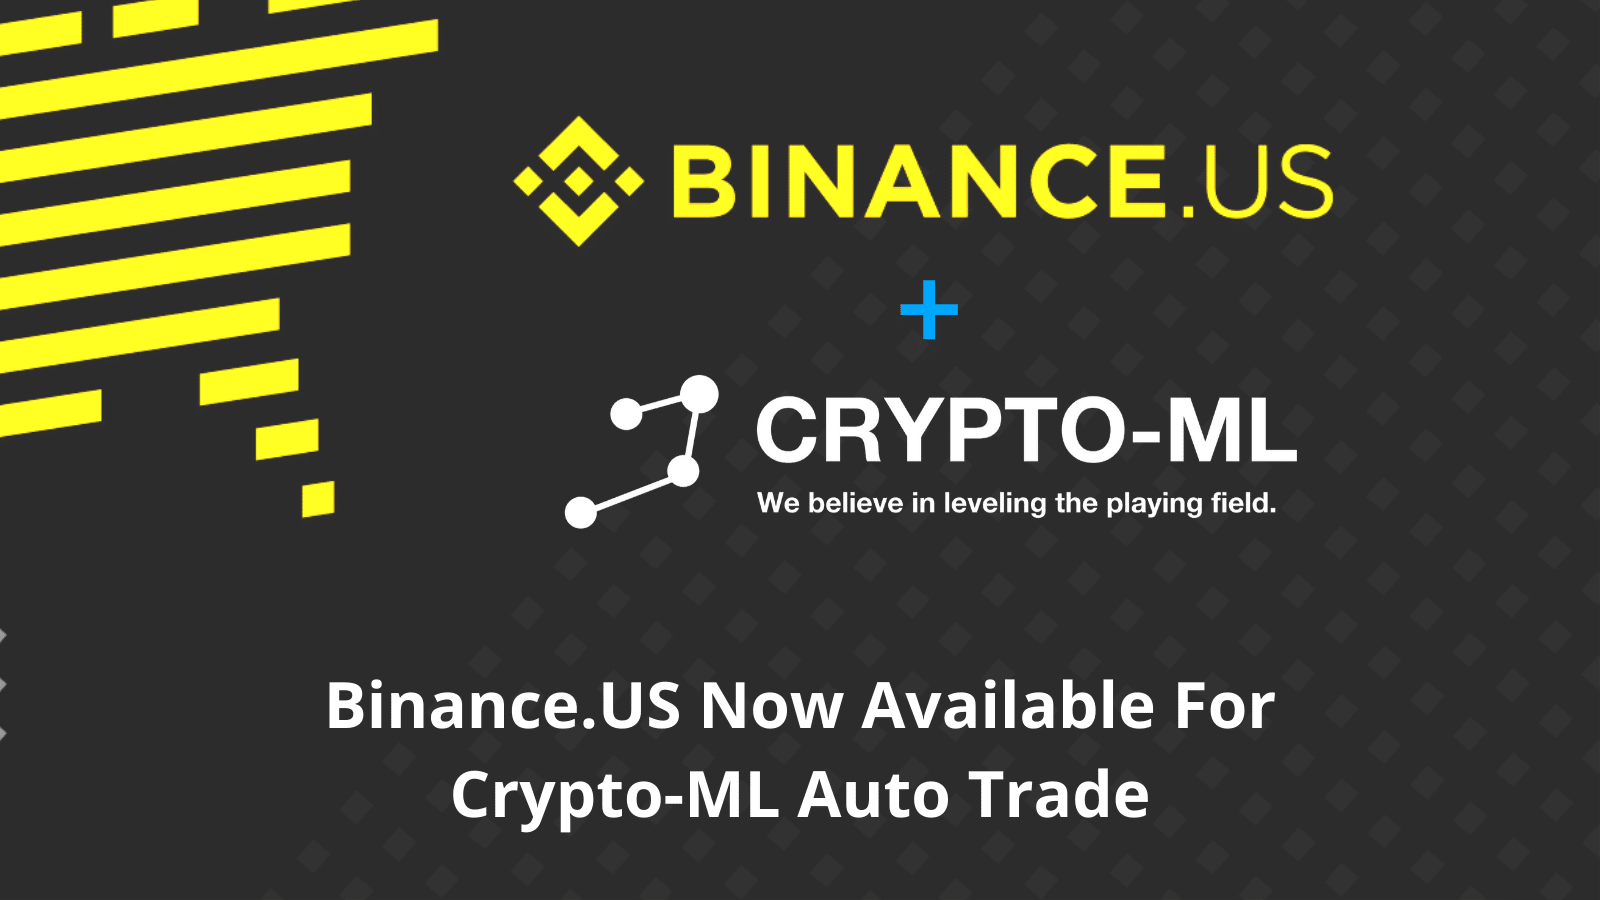 what cryptos are on binance us